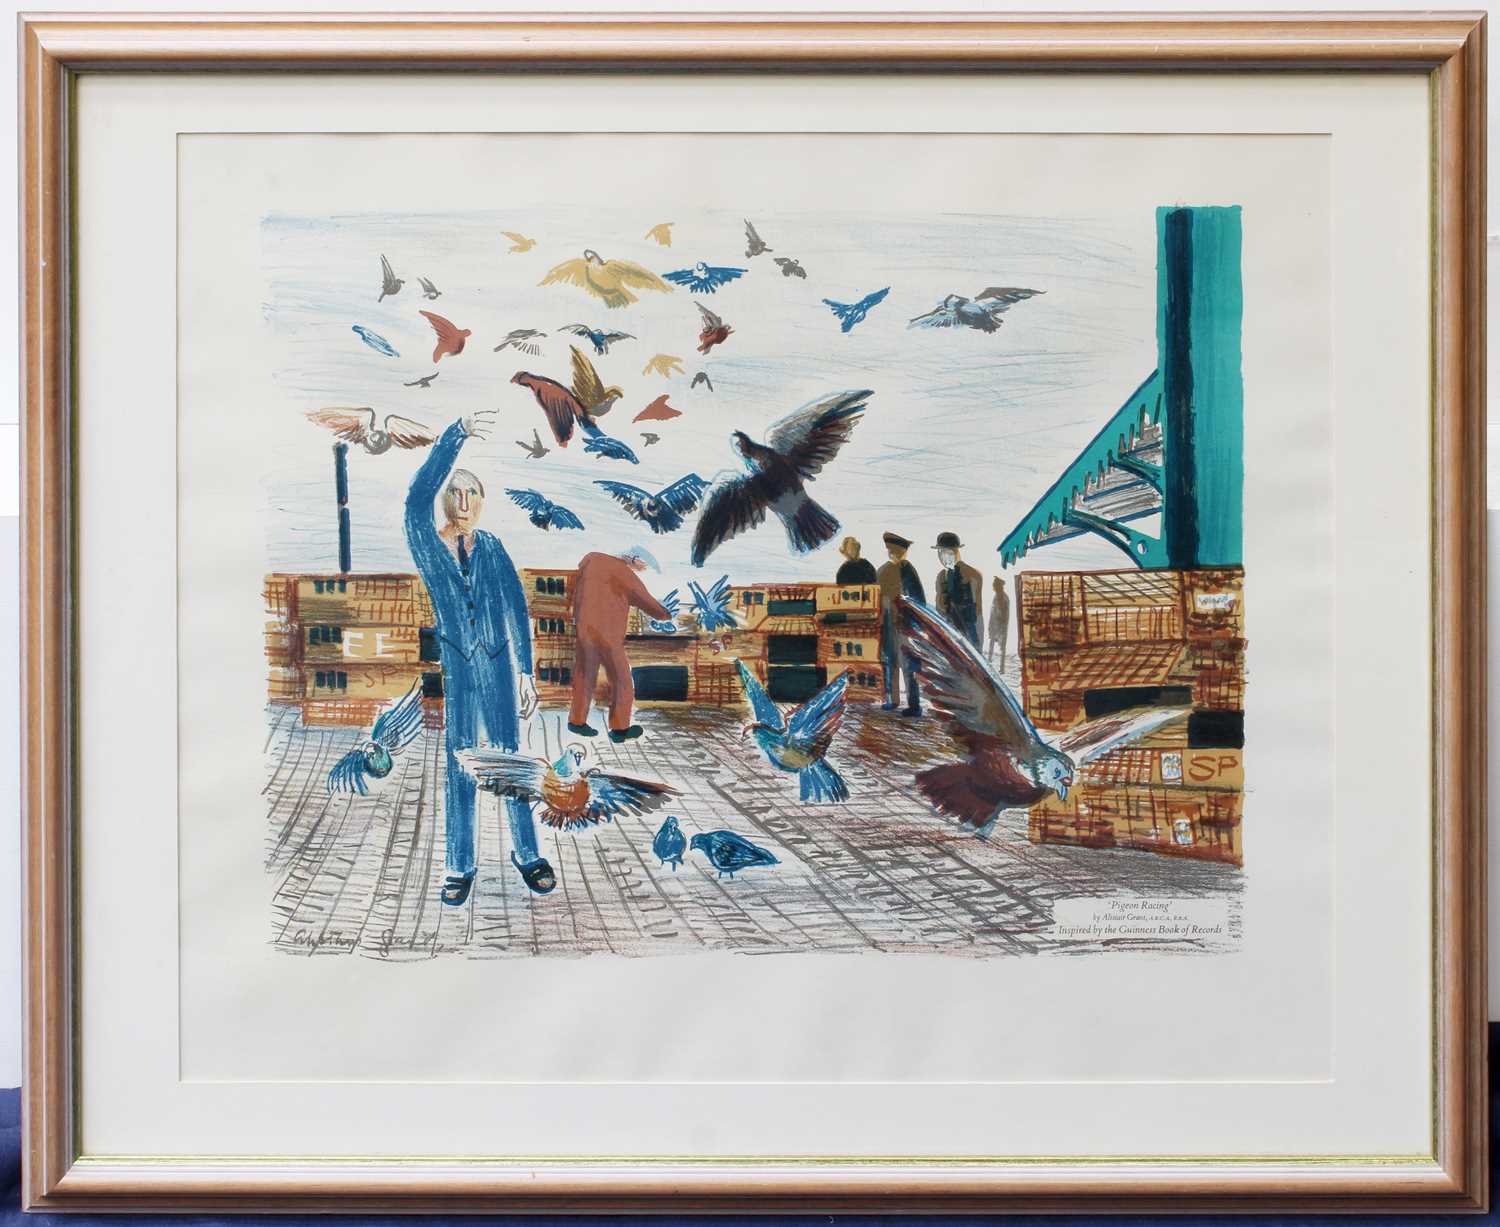 Alistair Grant ARCA, RBA (1925-1997) "Pigeon Racing" Lithograph inspired by the Guinness Book of - Image 2 of 2